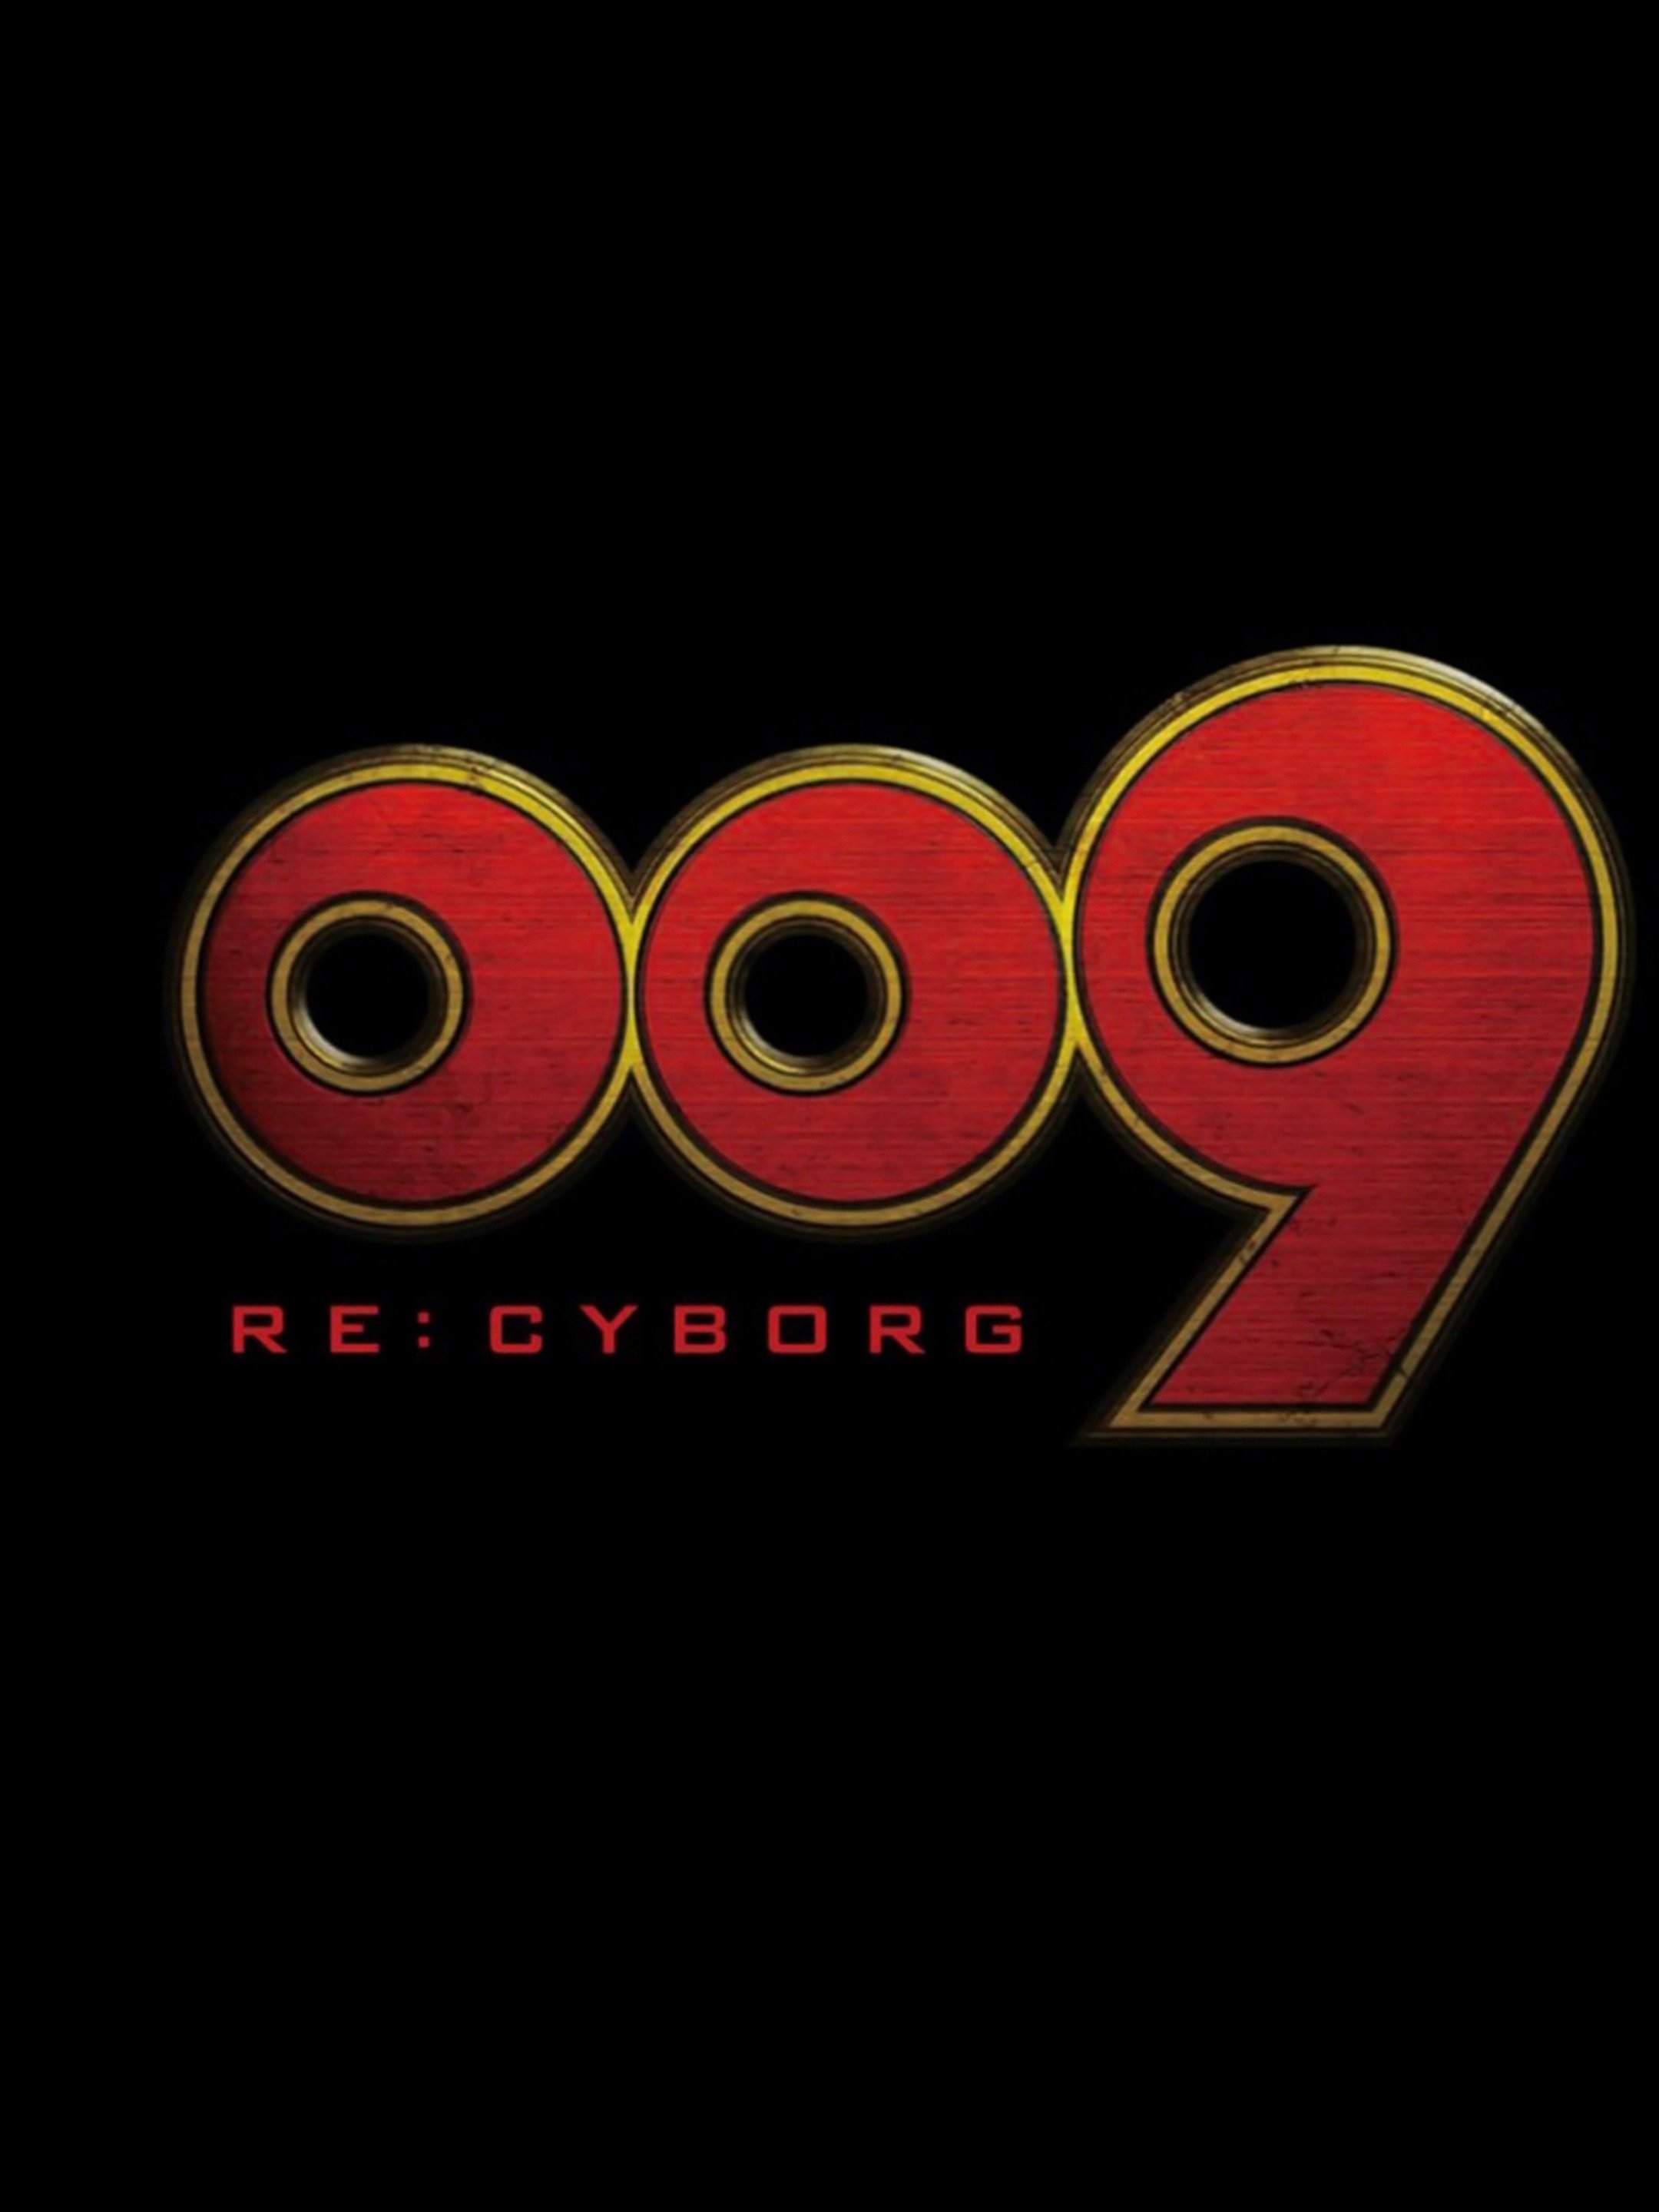 download 009 re cyborg where to watch